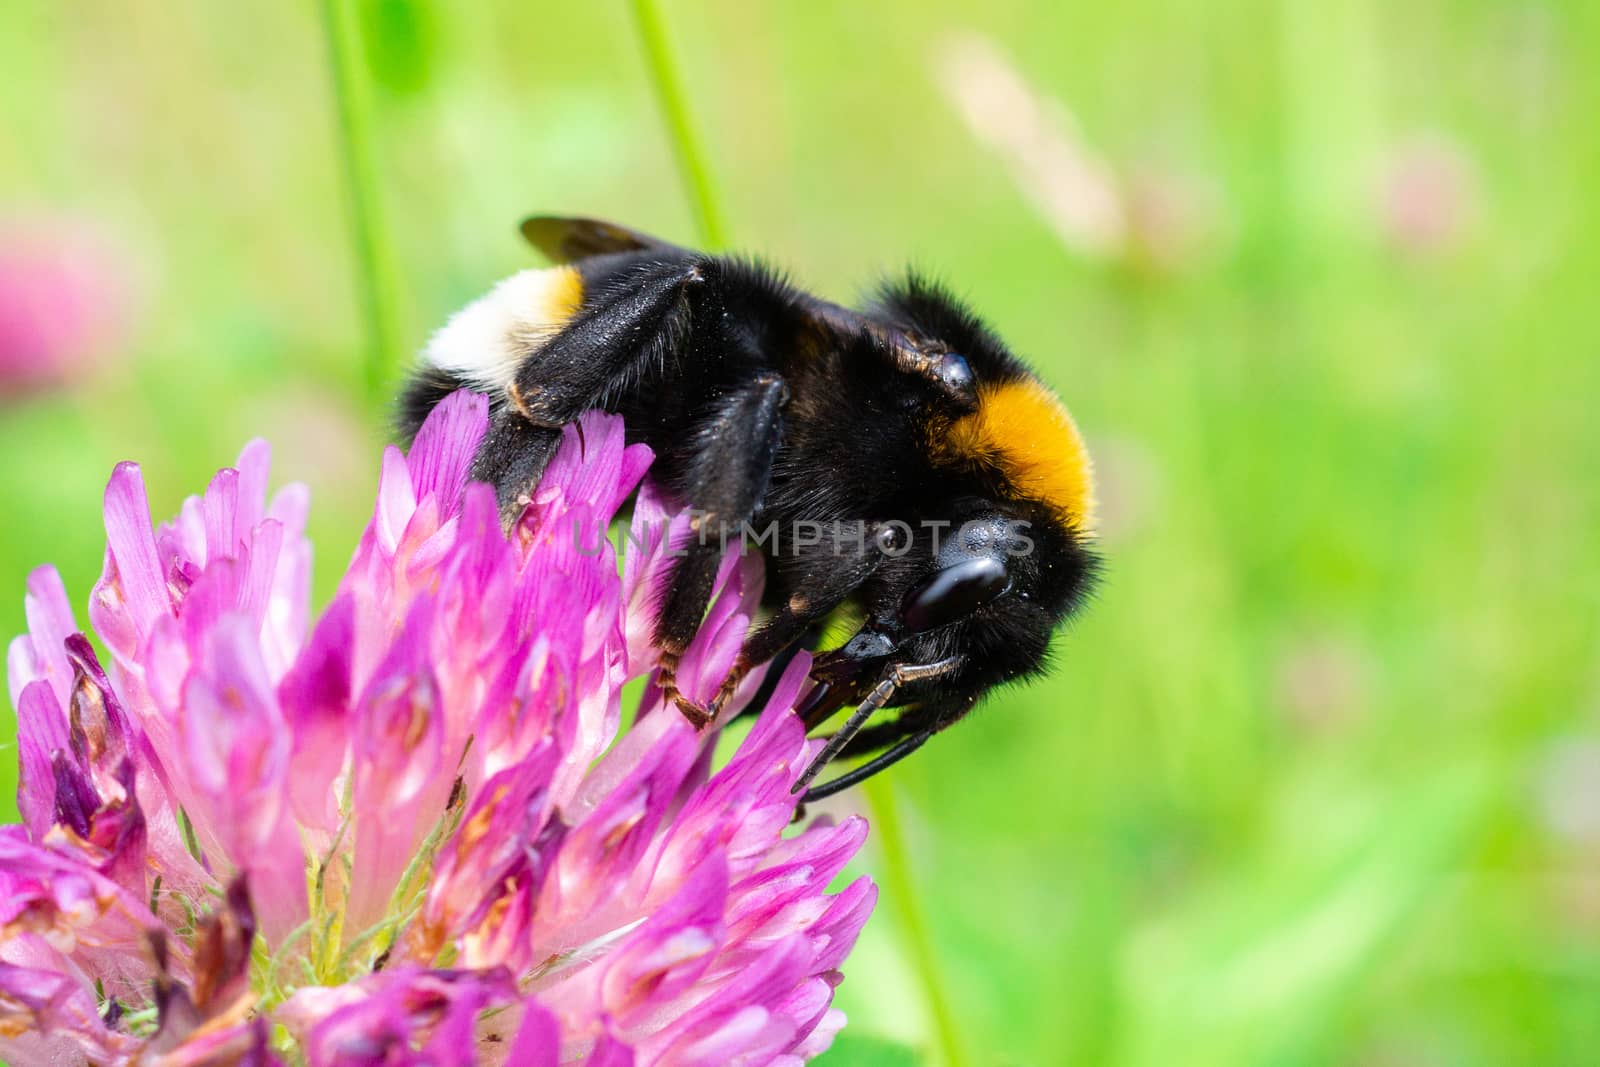 A bumblebee gathers pollen on a red flower, a bumblebee on a clover